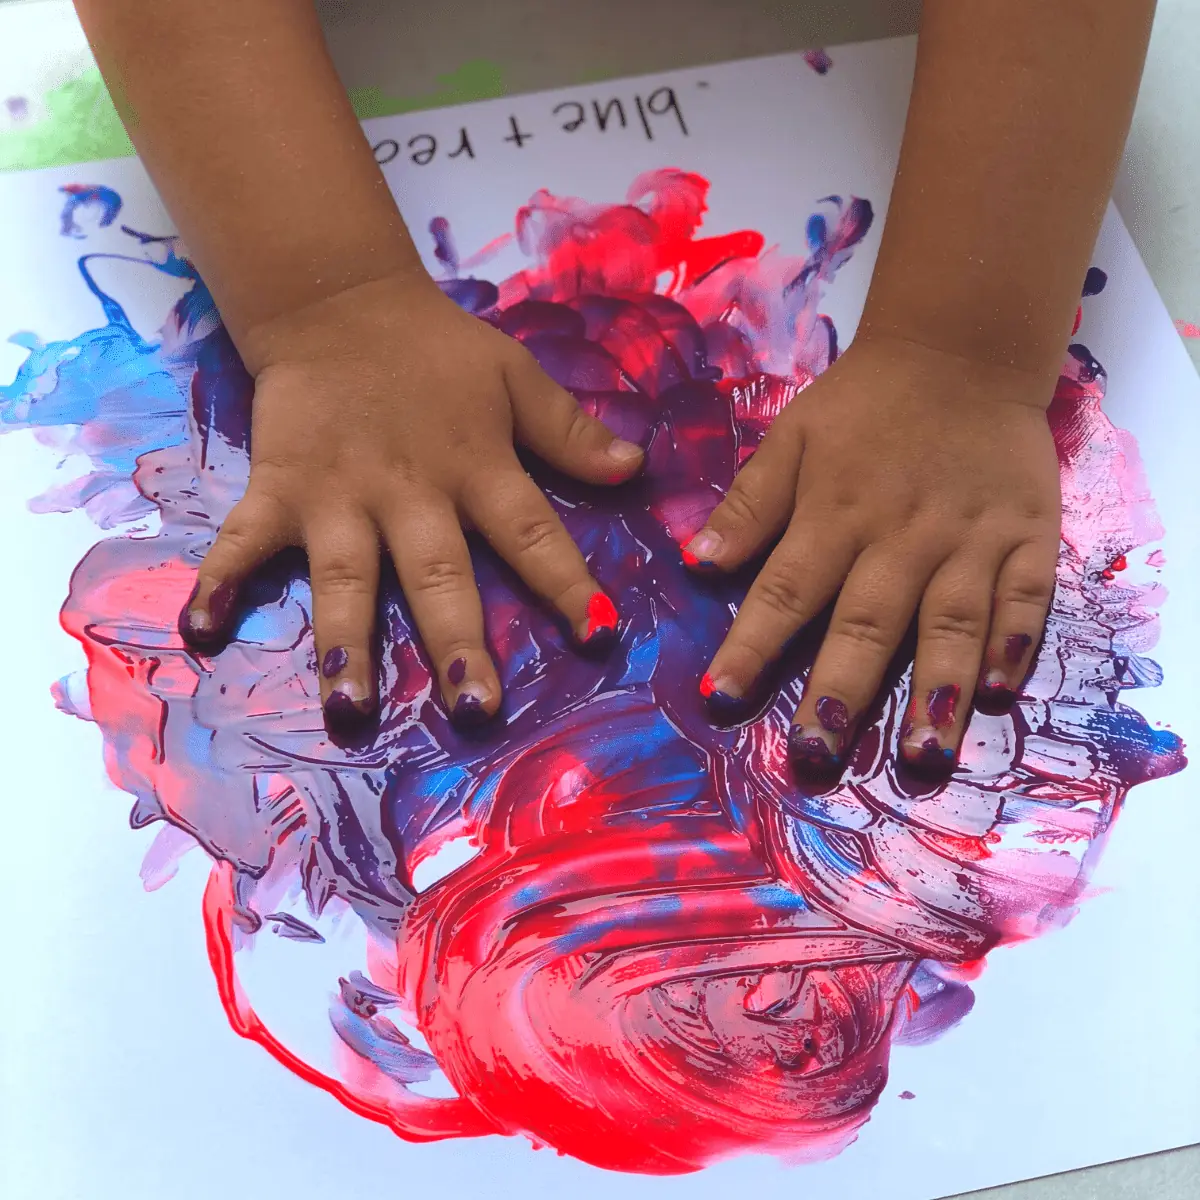 A child's hands, adorned with red, blue, and white paint, showcasing creativity in a playful manner